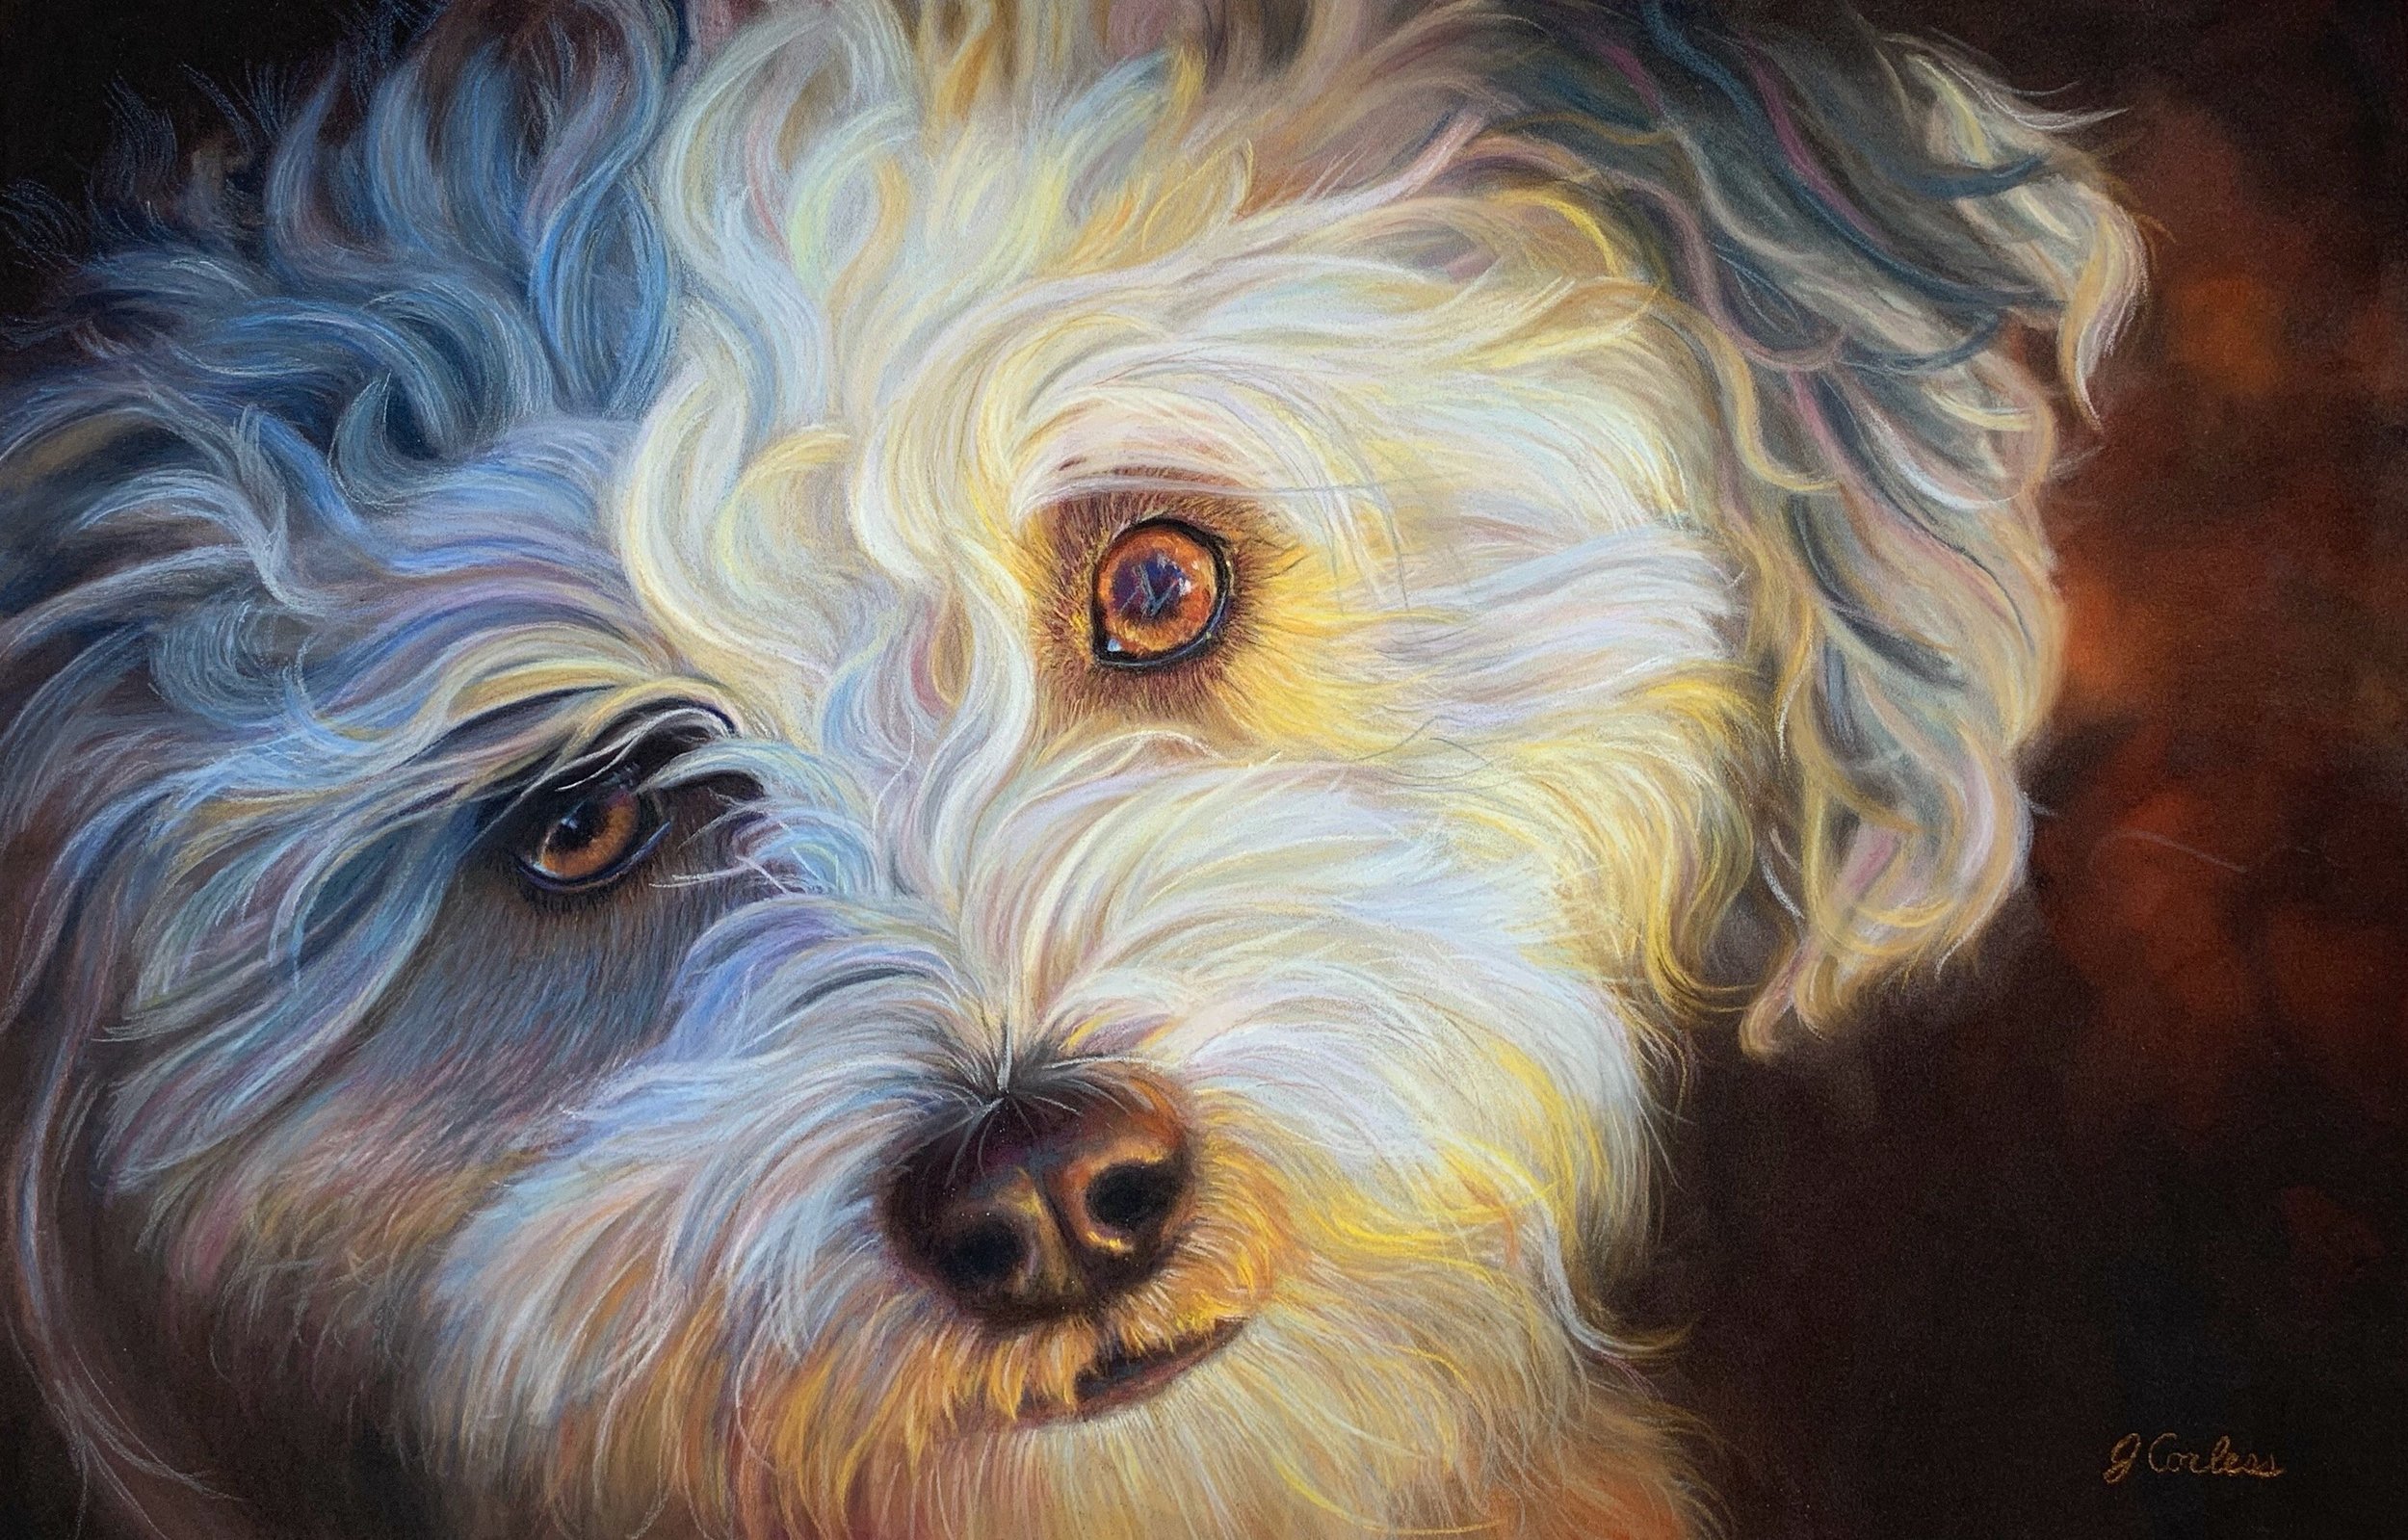 Bright Eyes 11x17 pastel. Please contact me with any questions or inquiries. 